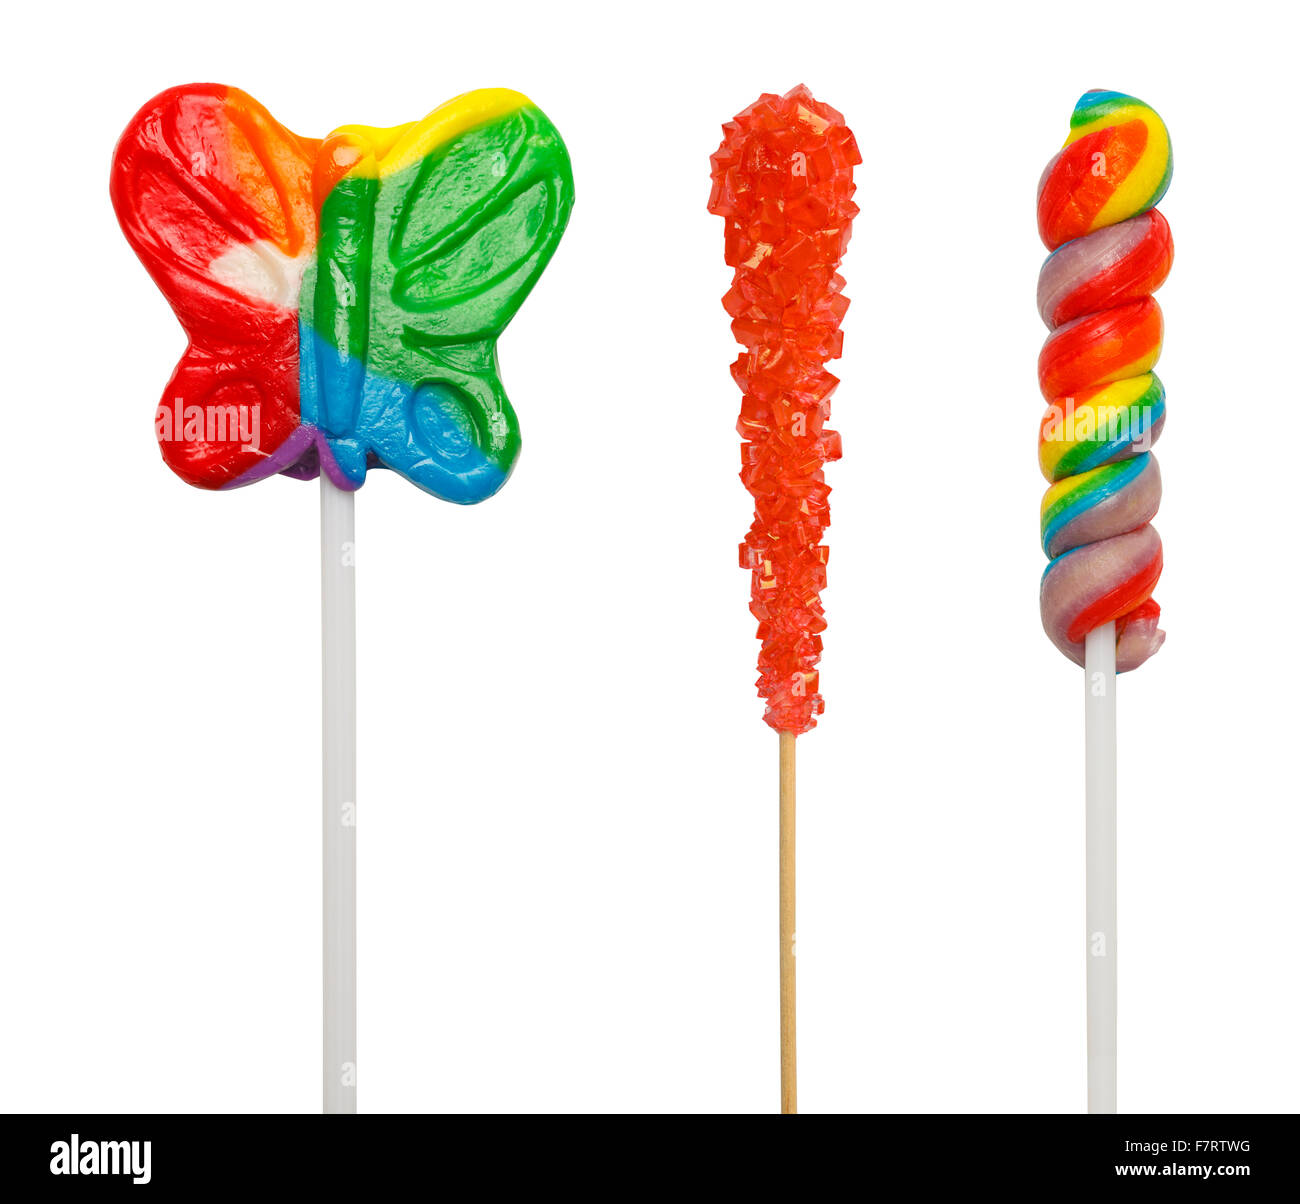 Three Different Lollipop Suckers Isolated on White Background. Stock Photo